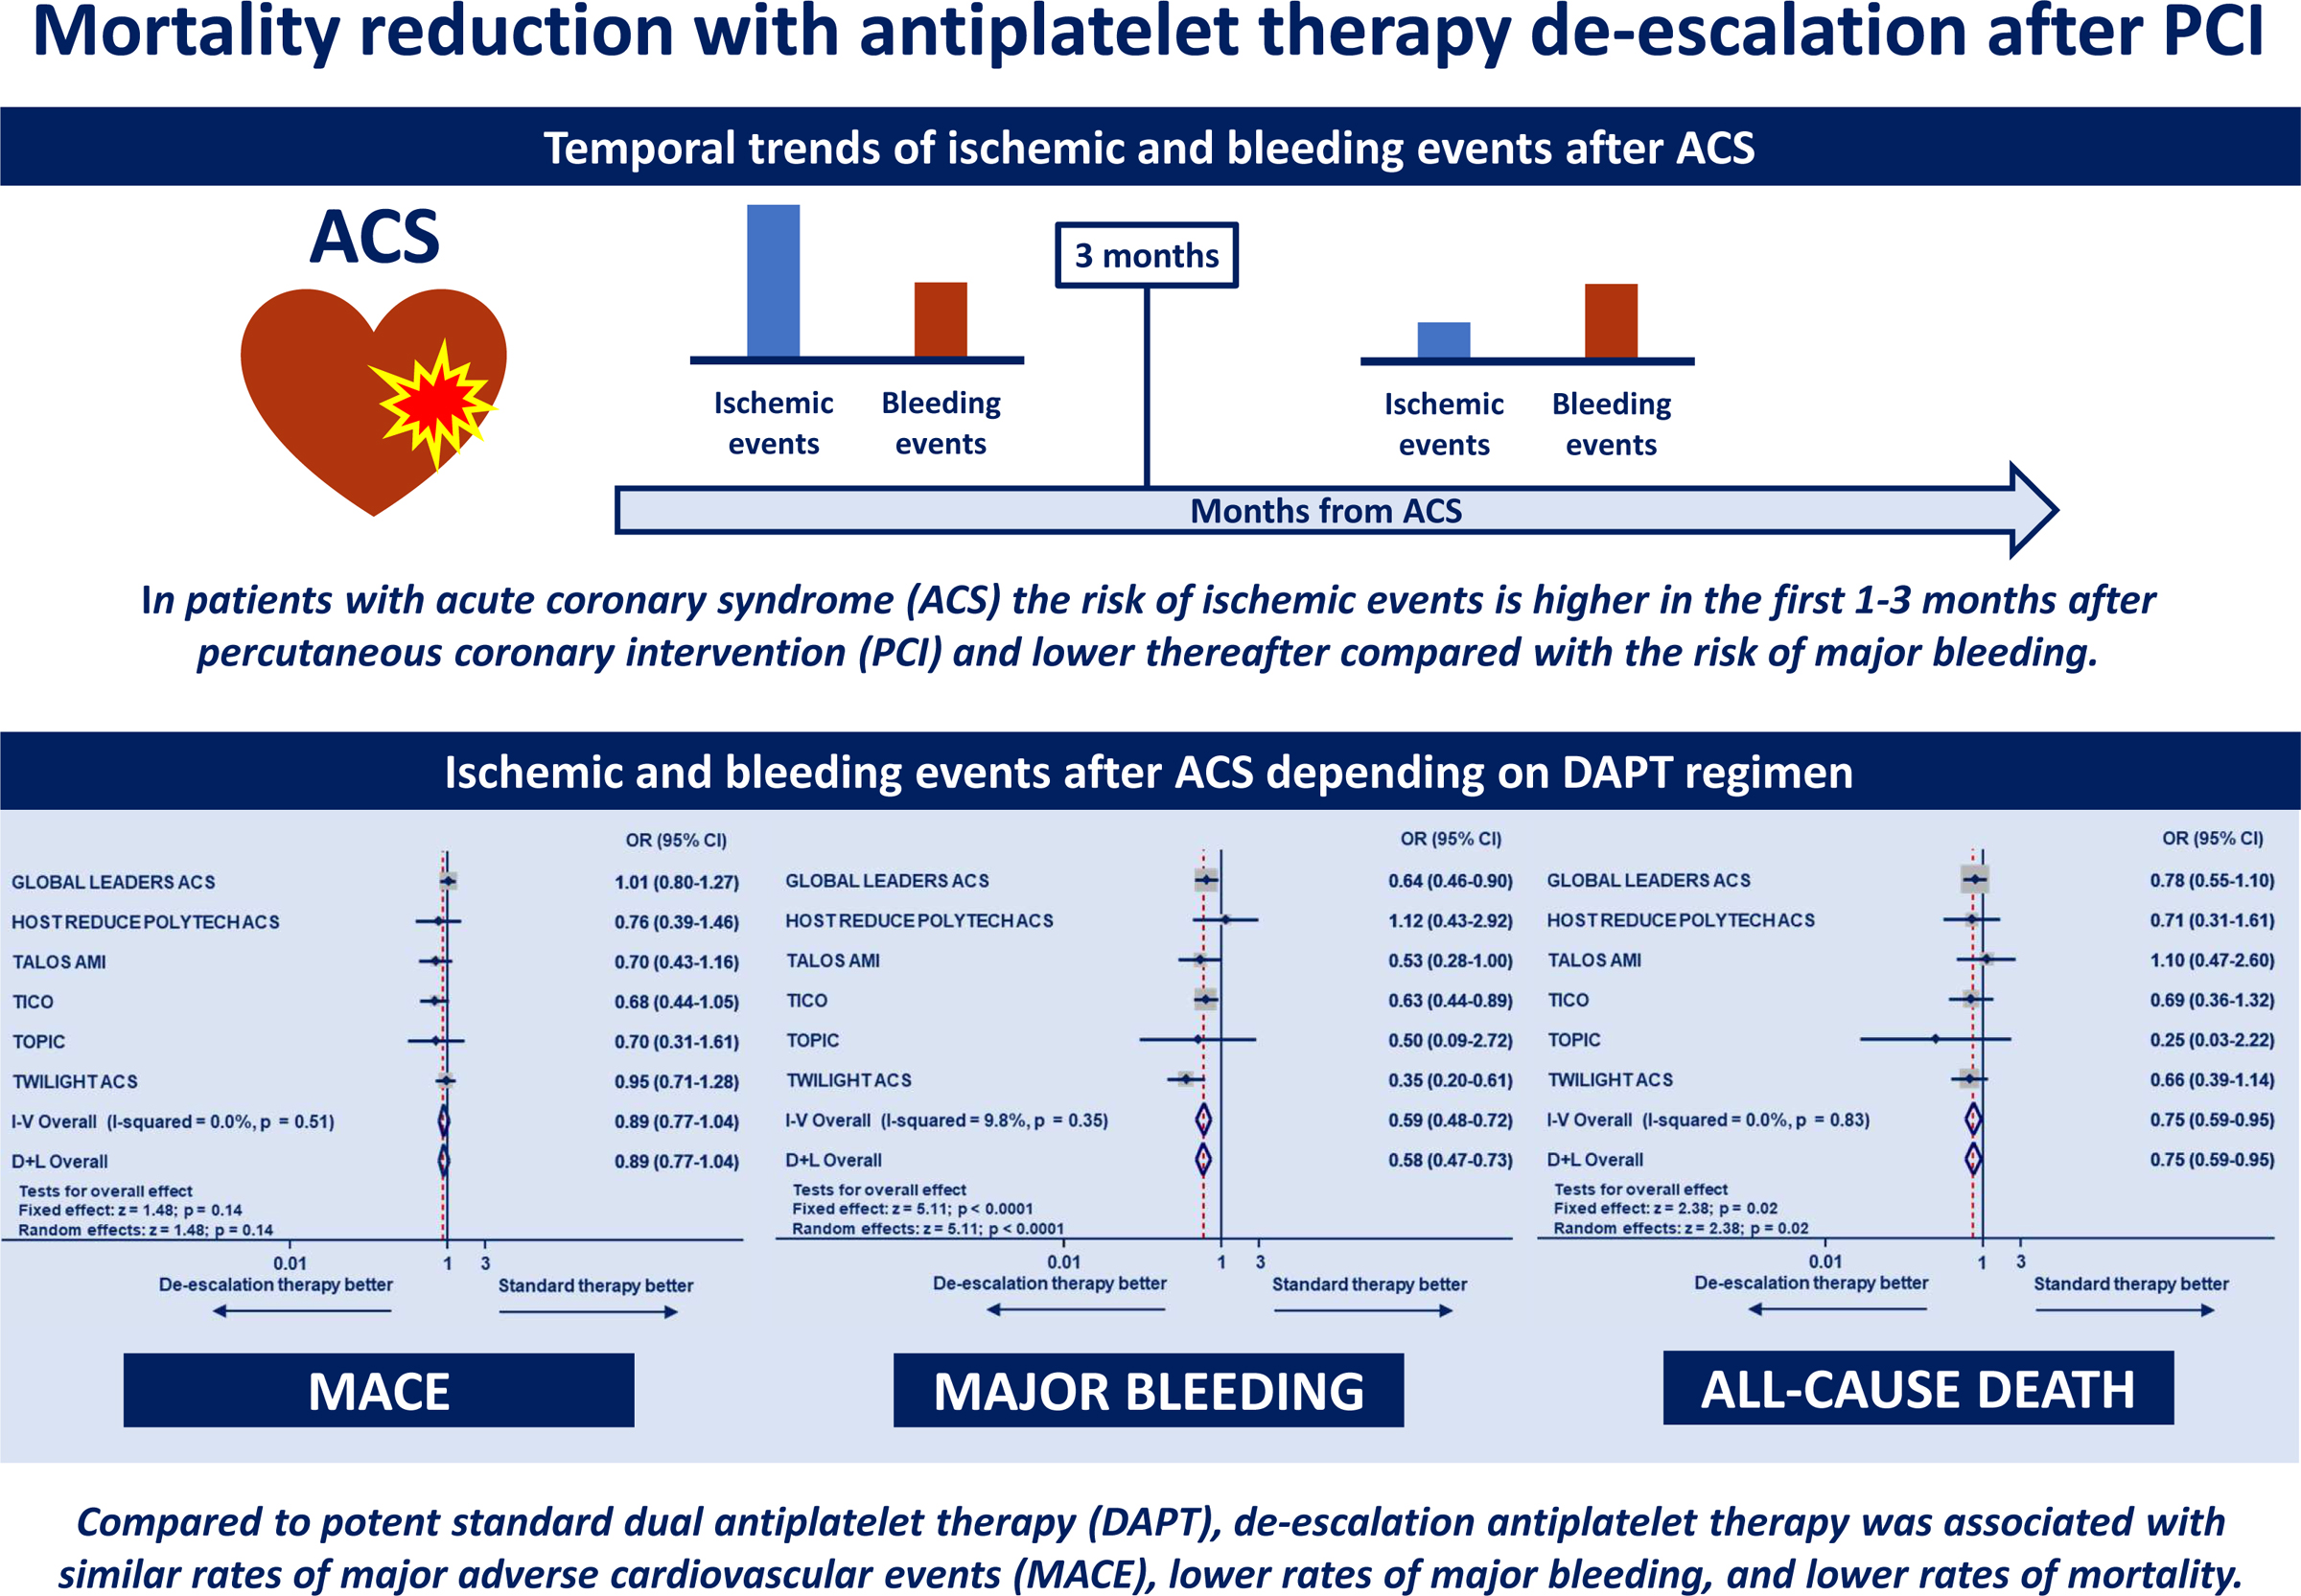 Reduced Mortality With Antiplatelet Therapy Deescalation After Percutaneous Coronary Intervention in Acute Coronary Syndromes: A Meta-Analysis